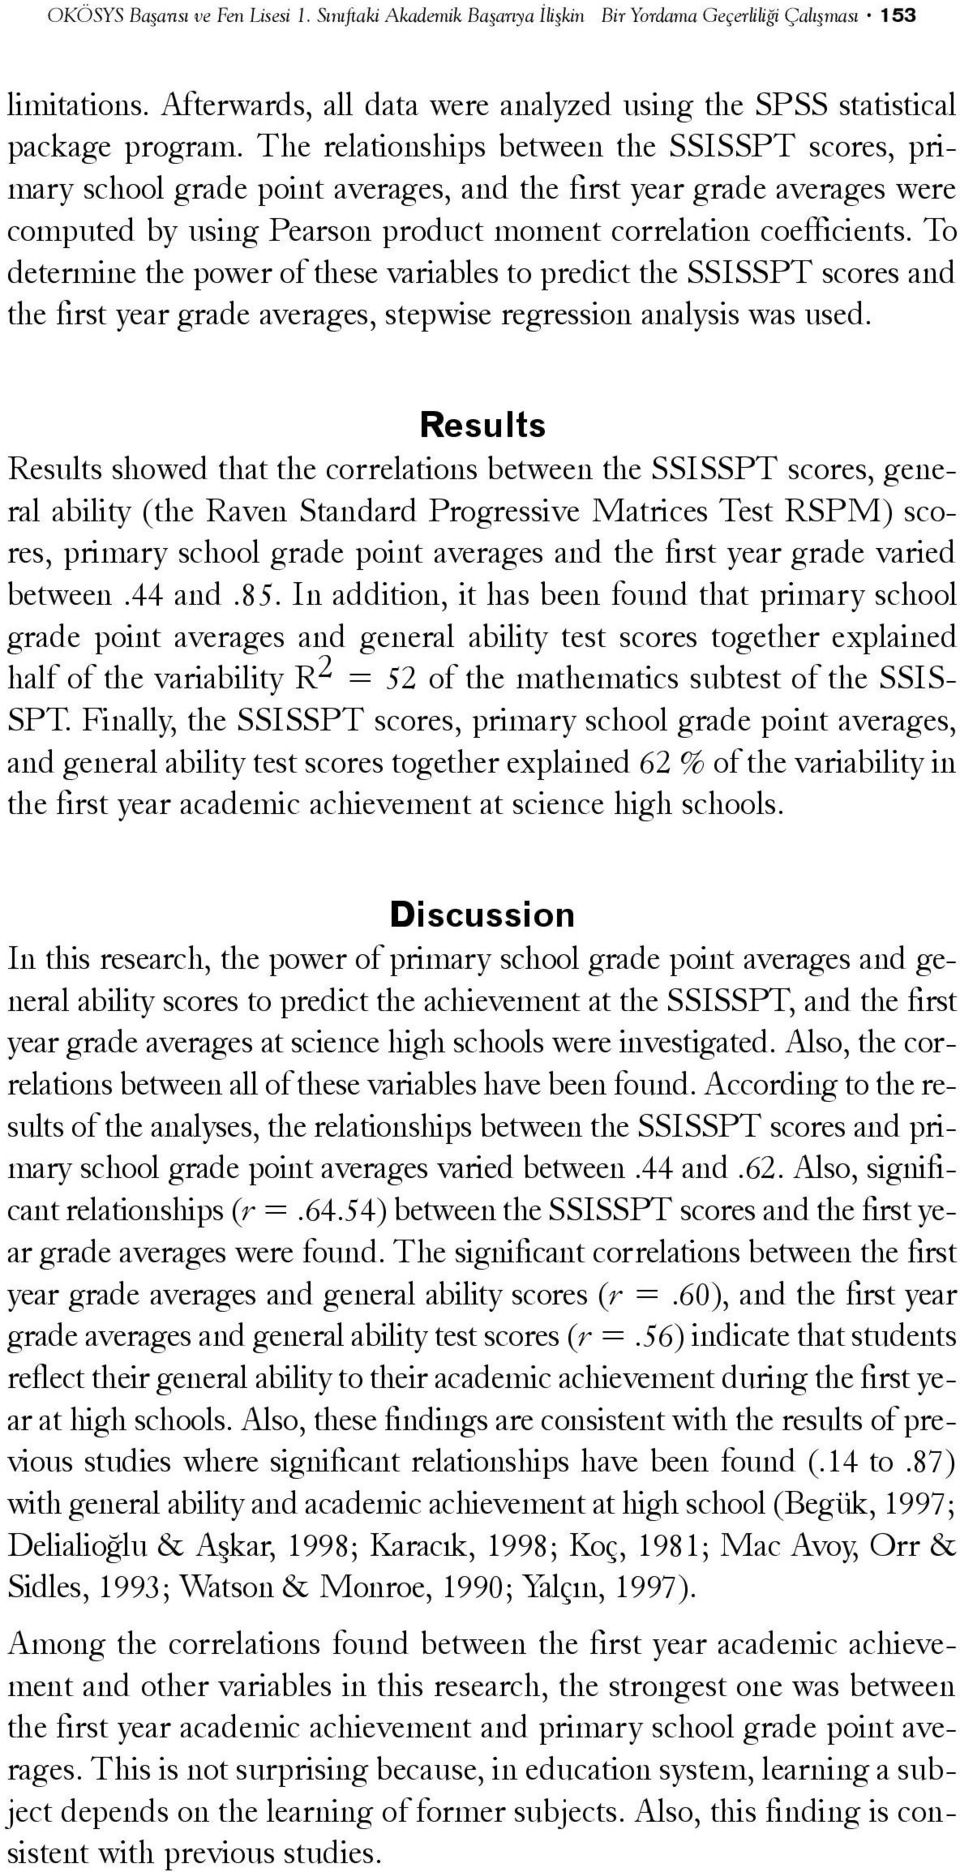 To determine the power of these variables to predict the SSISSPT scores and the first year grade averages, stepwise regression analysis was used.